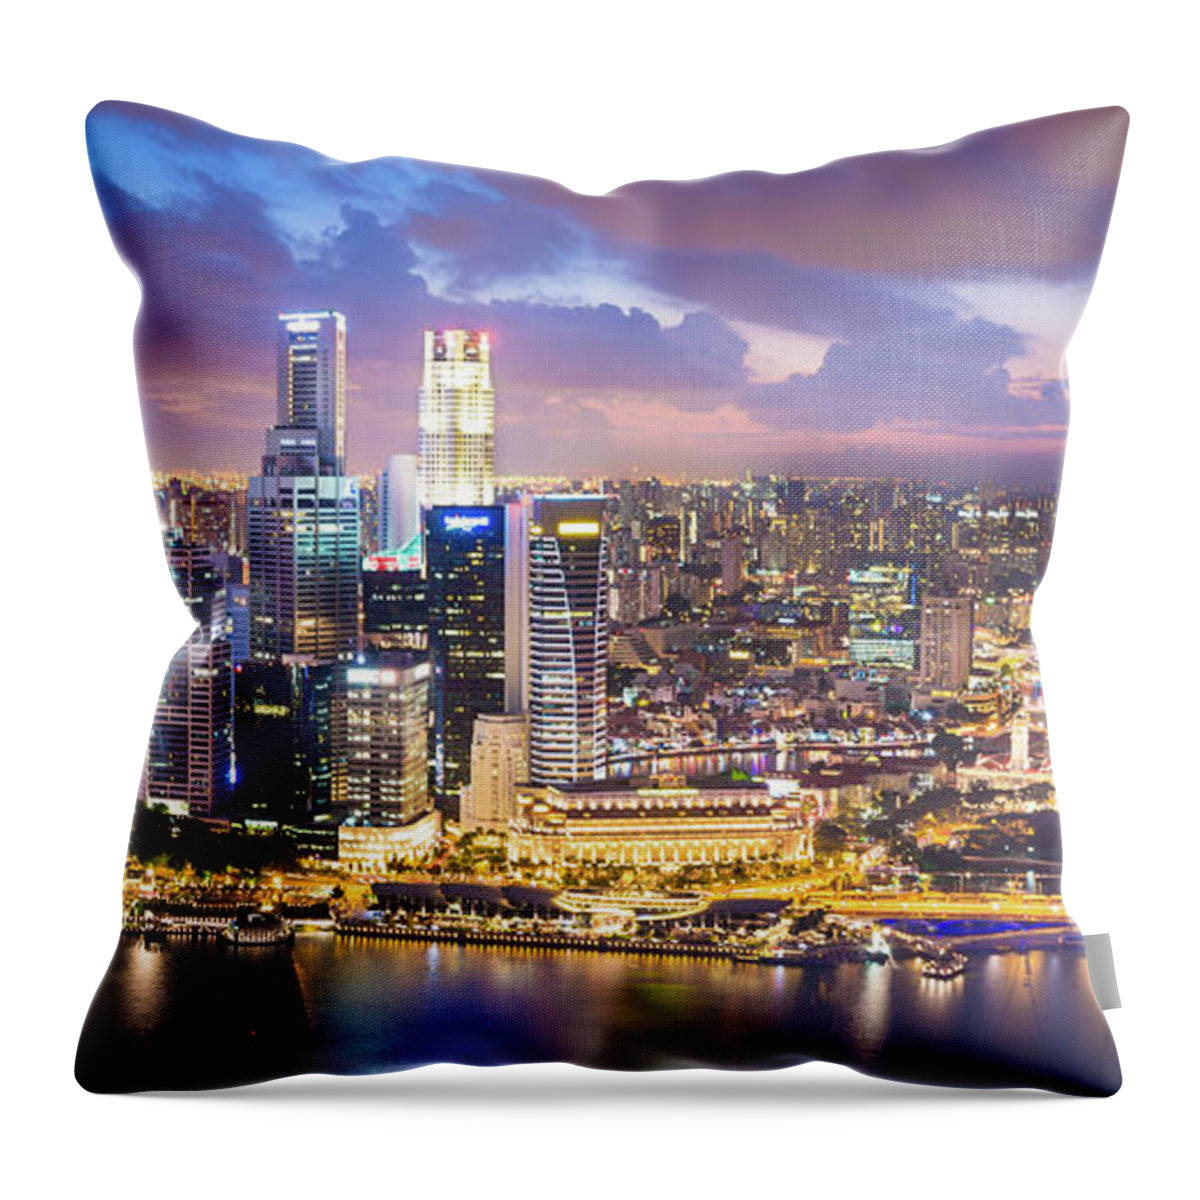 Downtown District Throw Pillow featuring the photograph Panoramic View Of Singapore At Dusk by Primeimages